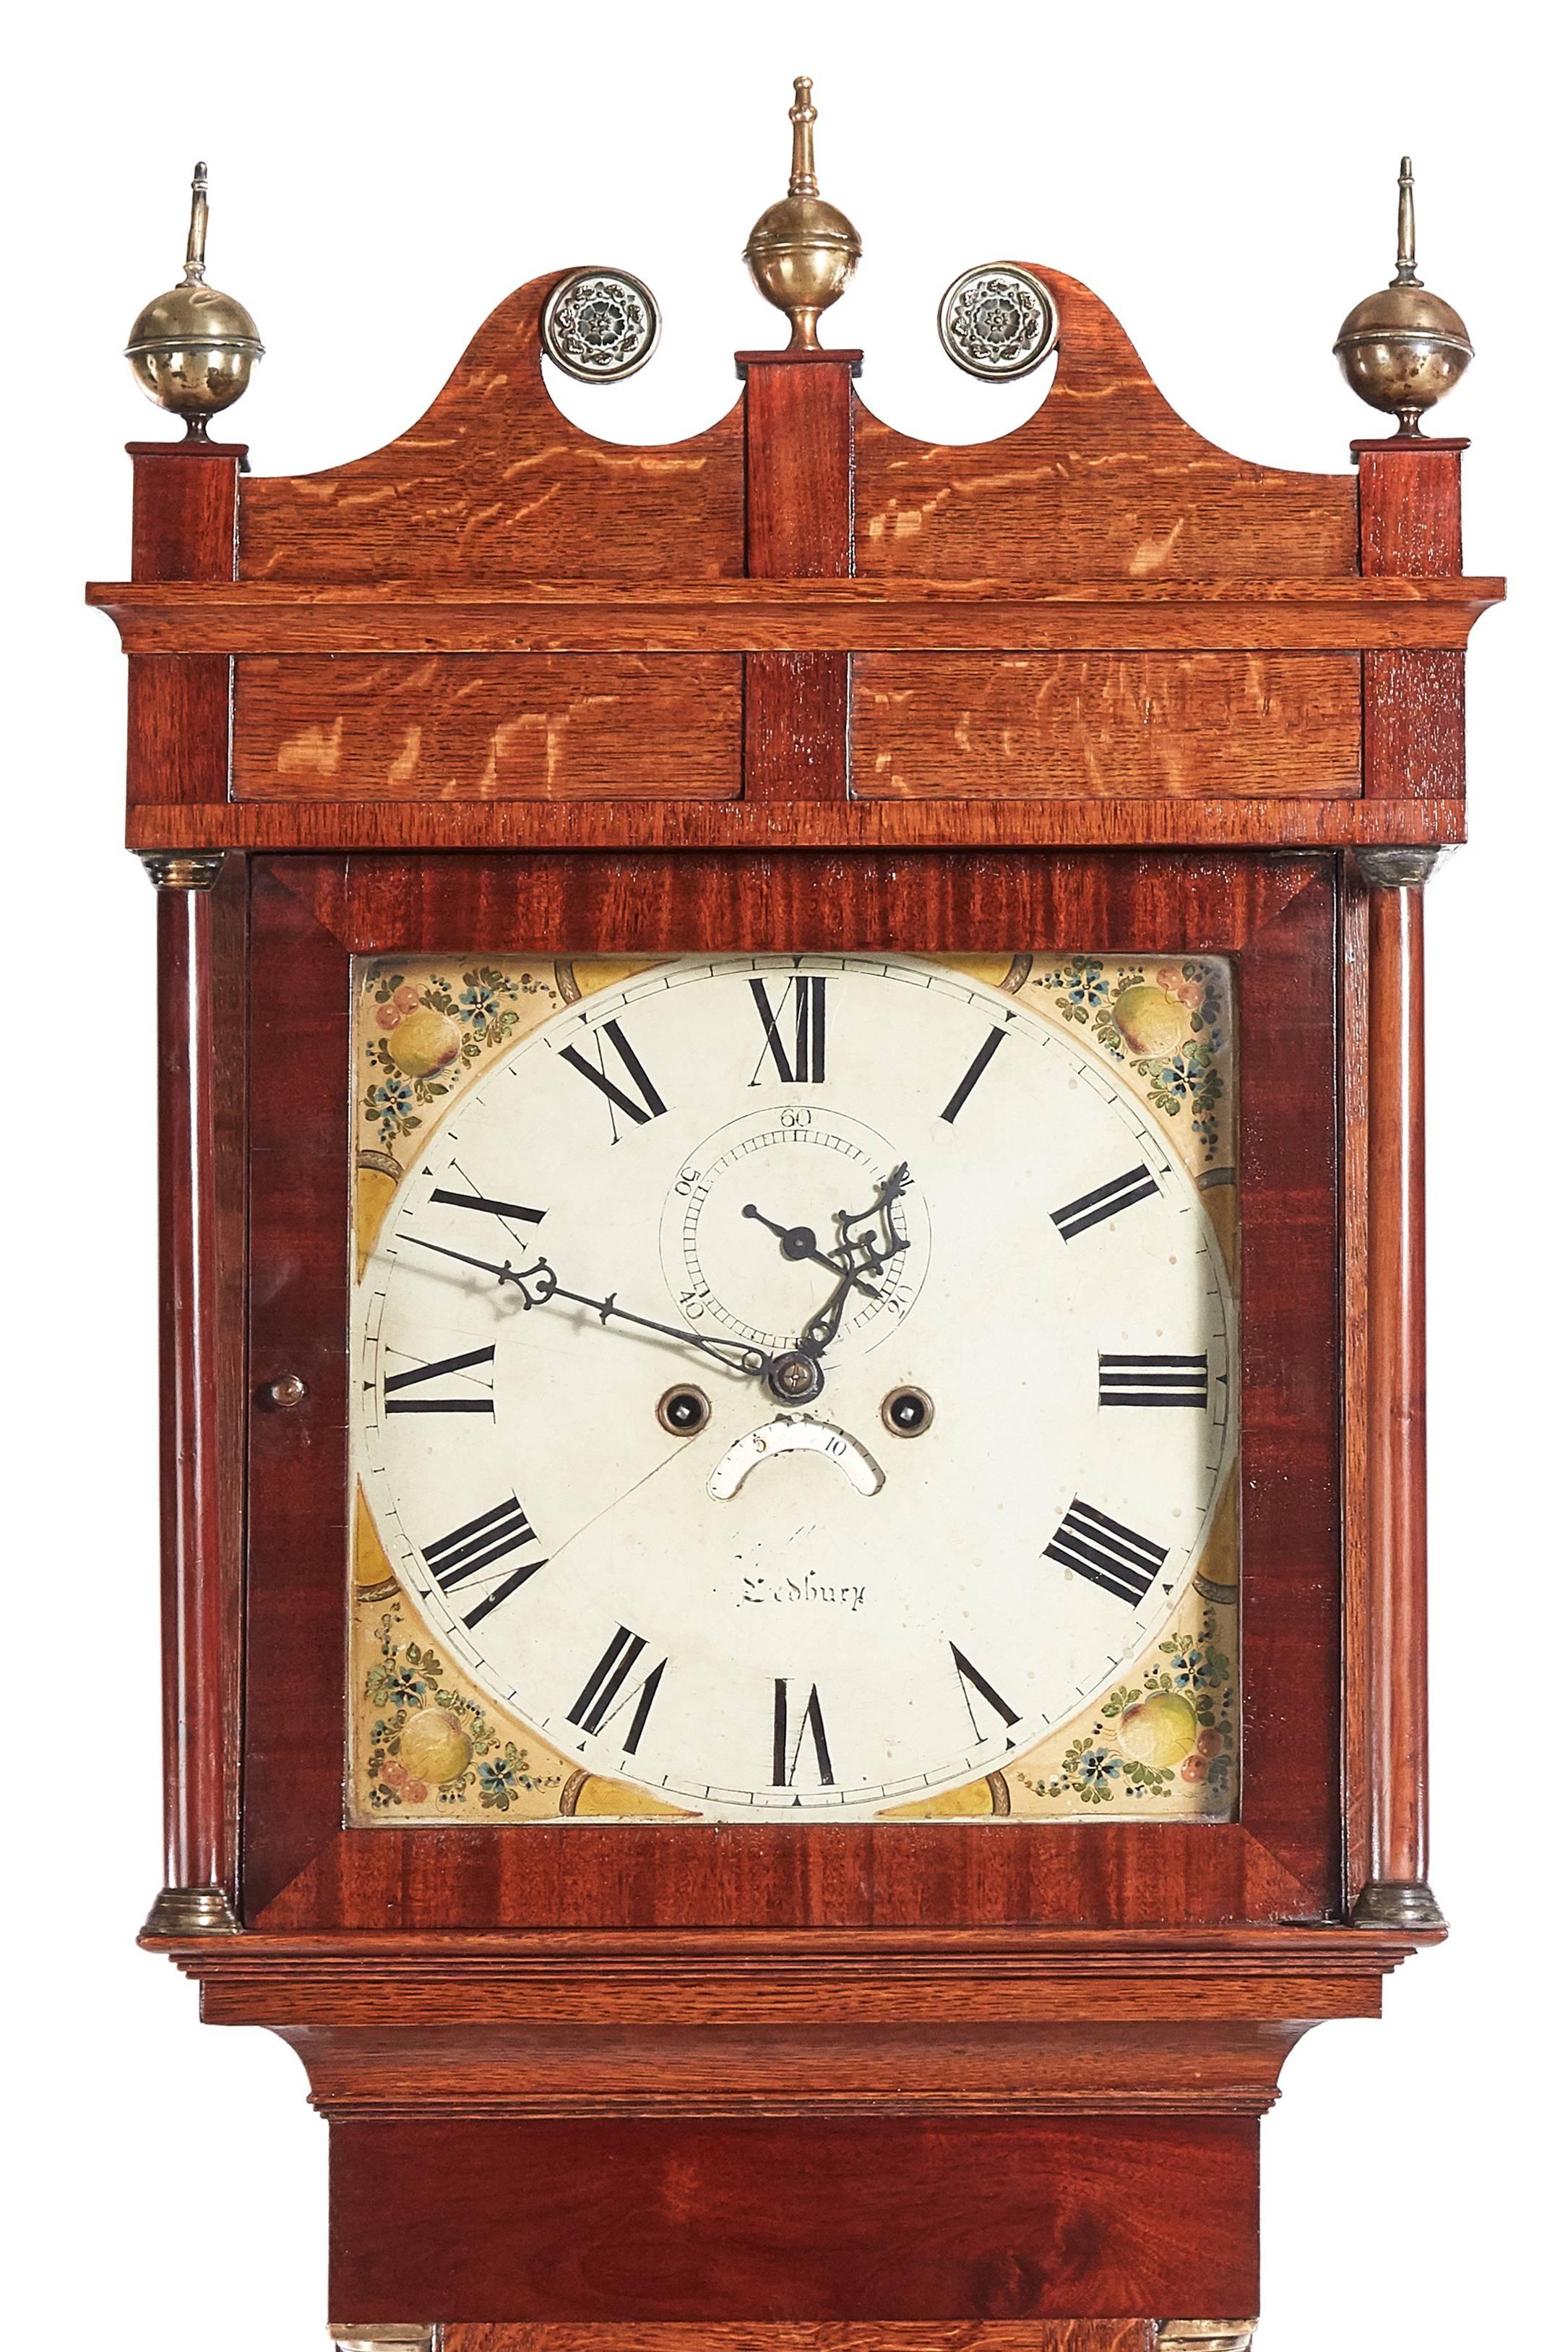 Antique oak 8 day longcase clock, with a swan-neck pediment, three original brass finials, lovely oak case crossbanded in mahogany, brass capped columns, standing on shaped bracket feet,8 day movement striking on a bell, attractive painted dial, all